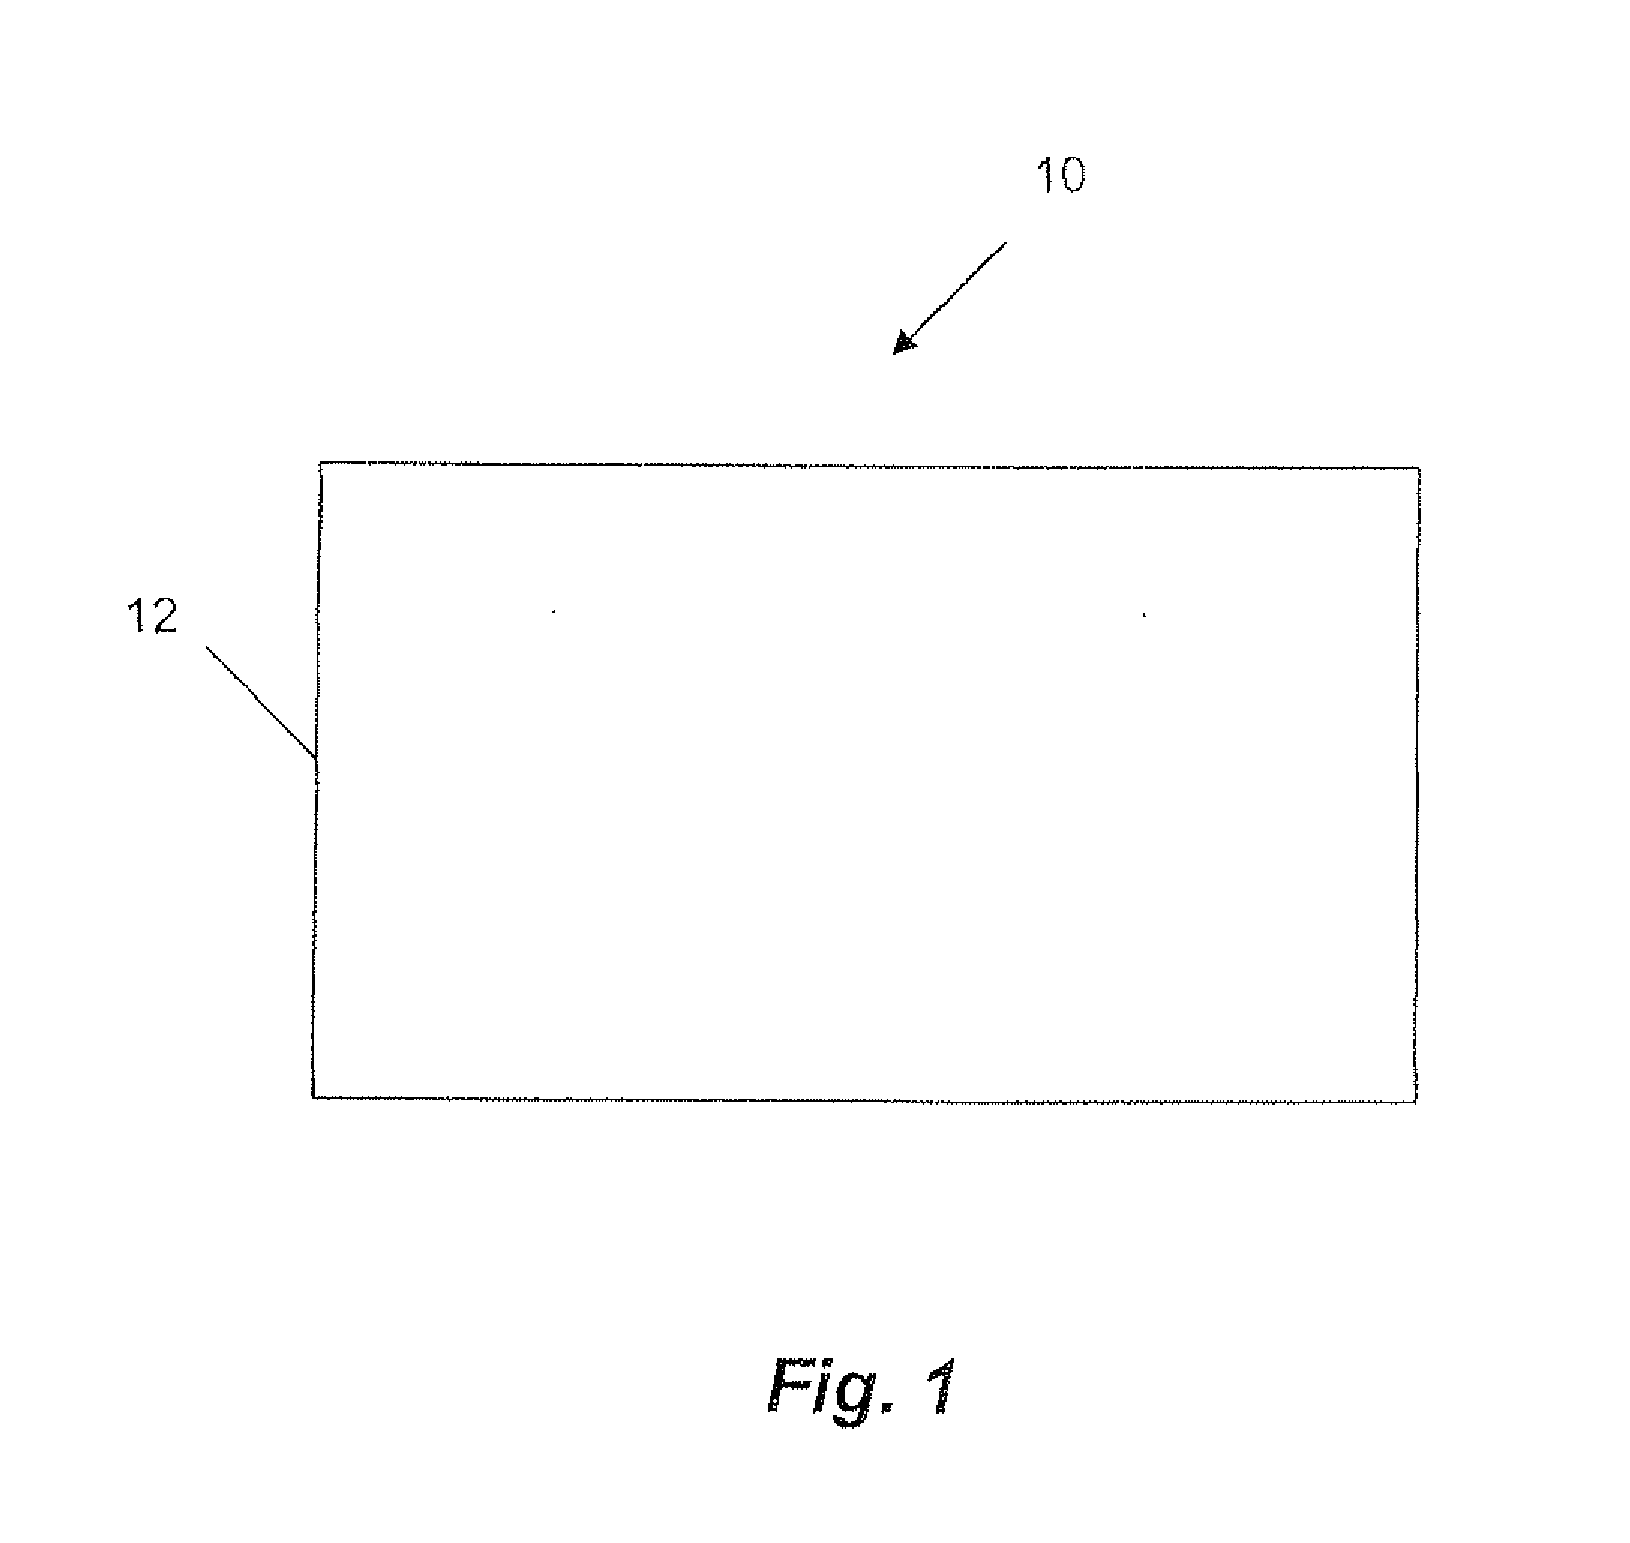 Element for emission of thermal radiation